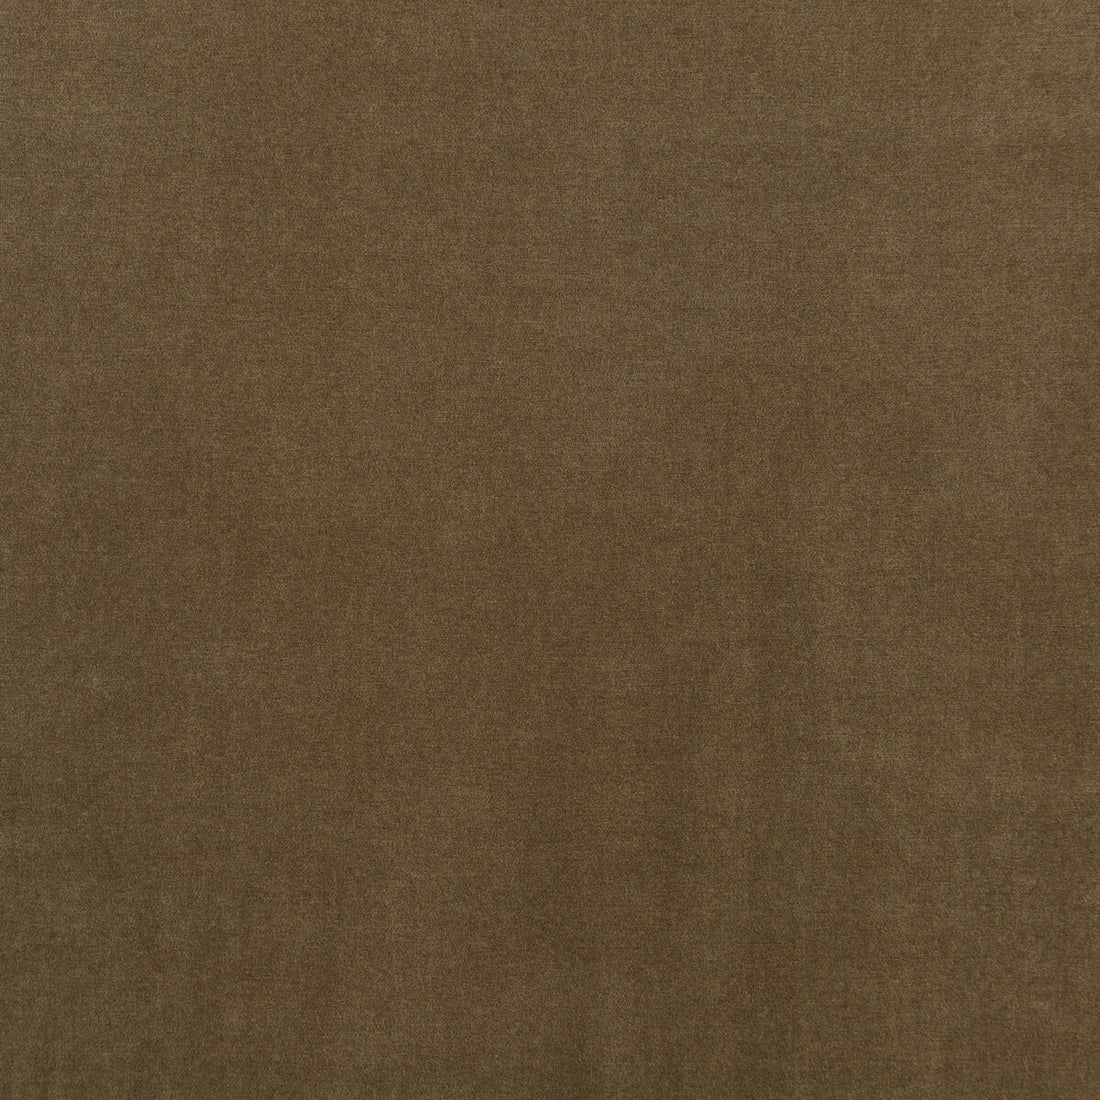 Cadogan fabric in taupe color - pattern PF50439.210.0 - by Baker Lifestyle in the Carnival collection